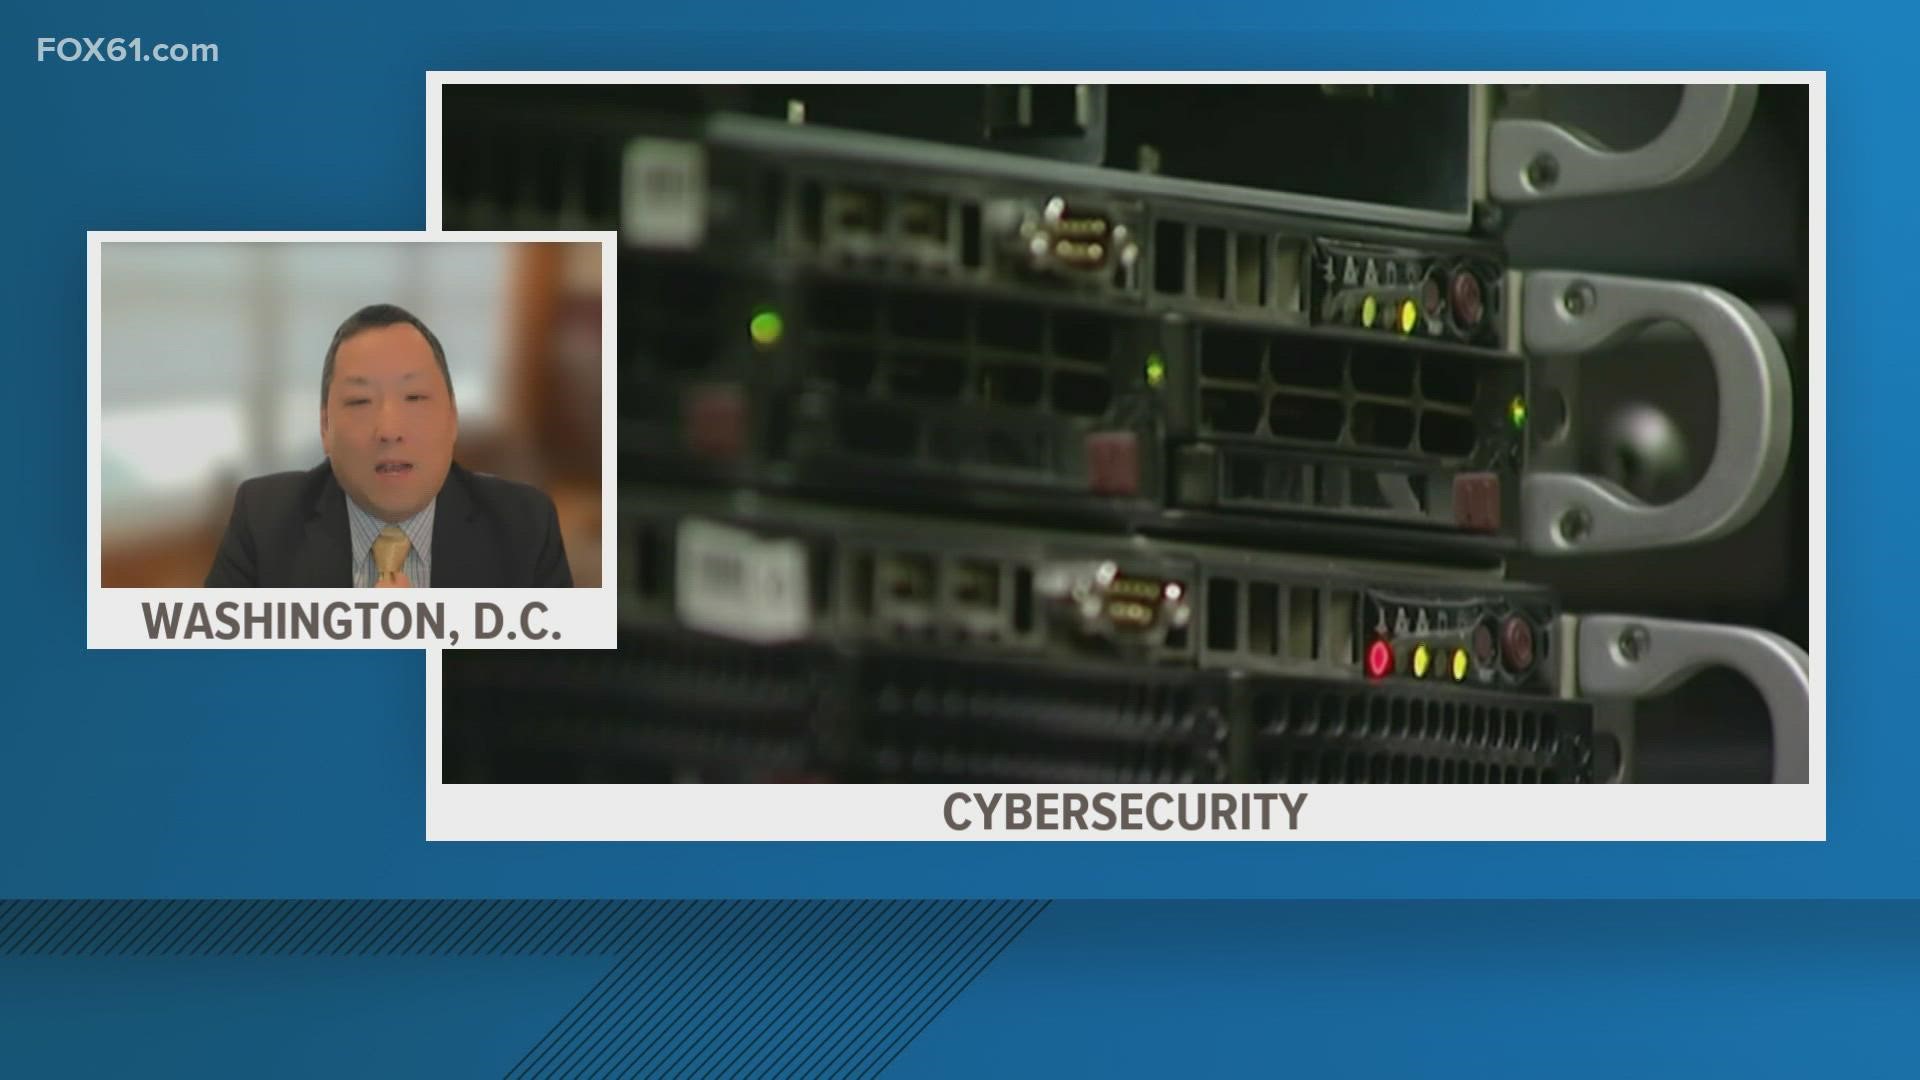 David Sun, principal with Clifton Larson Allen, discusses cybersecurity and how businesses can keep themselves safe